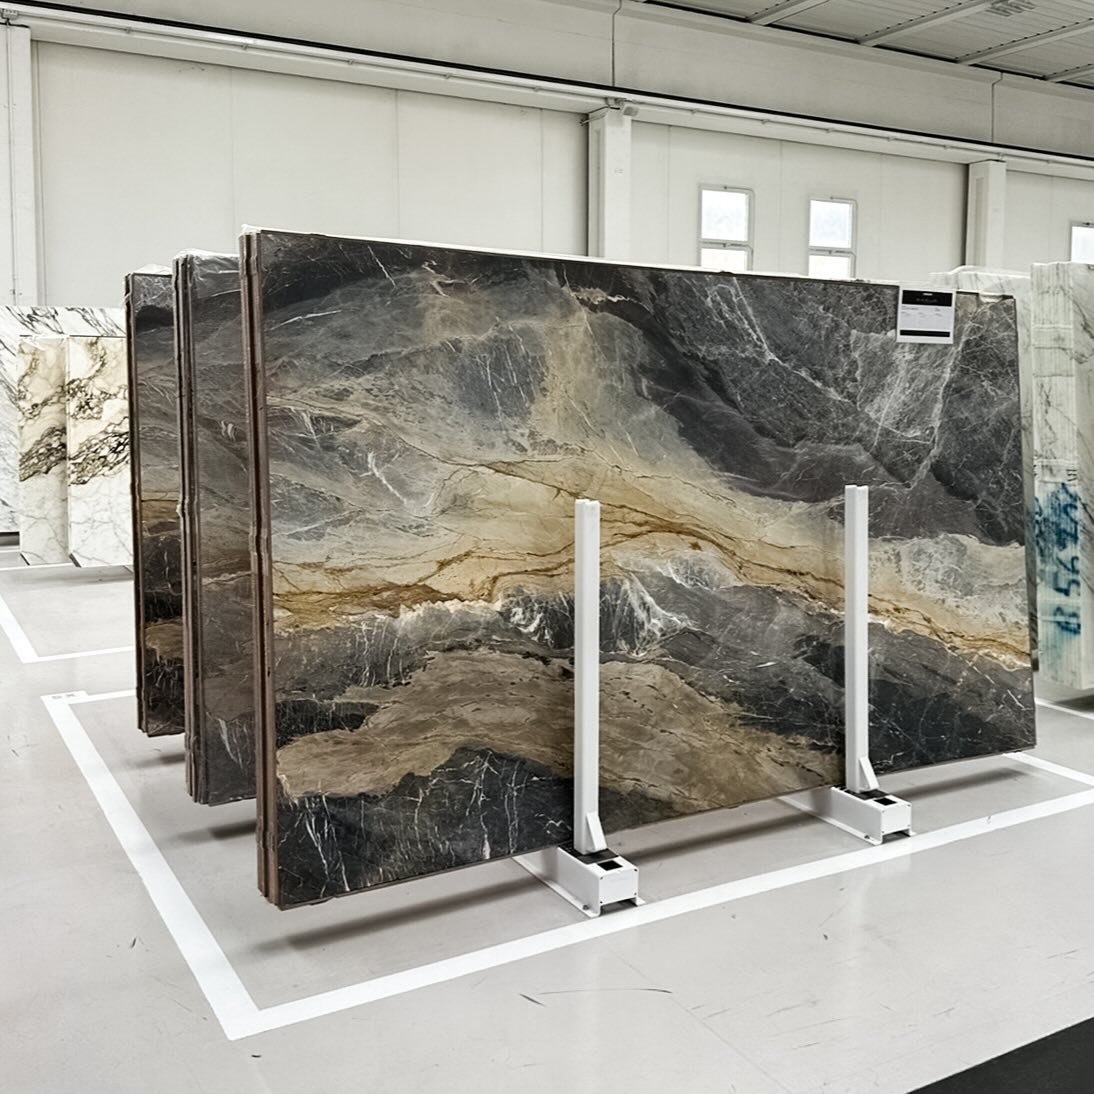 Gorgeous Natural Stone Worktops &amp; Surfaces from around the world courtesy of @cereserverona #measured #made #fitted by @lbsstone 

#worktops #onyx #kitchen #design #art #stone #nature #architecture #kitchendesign #kitcheninspiration #bathroom #it